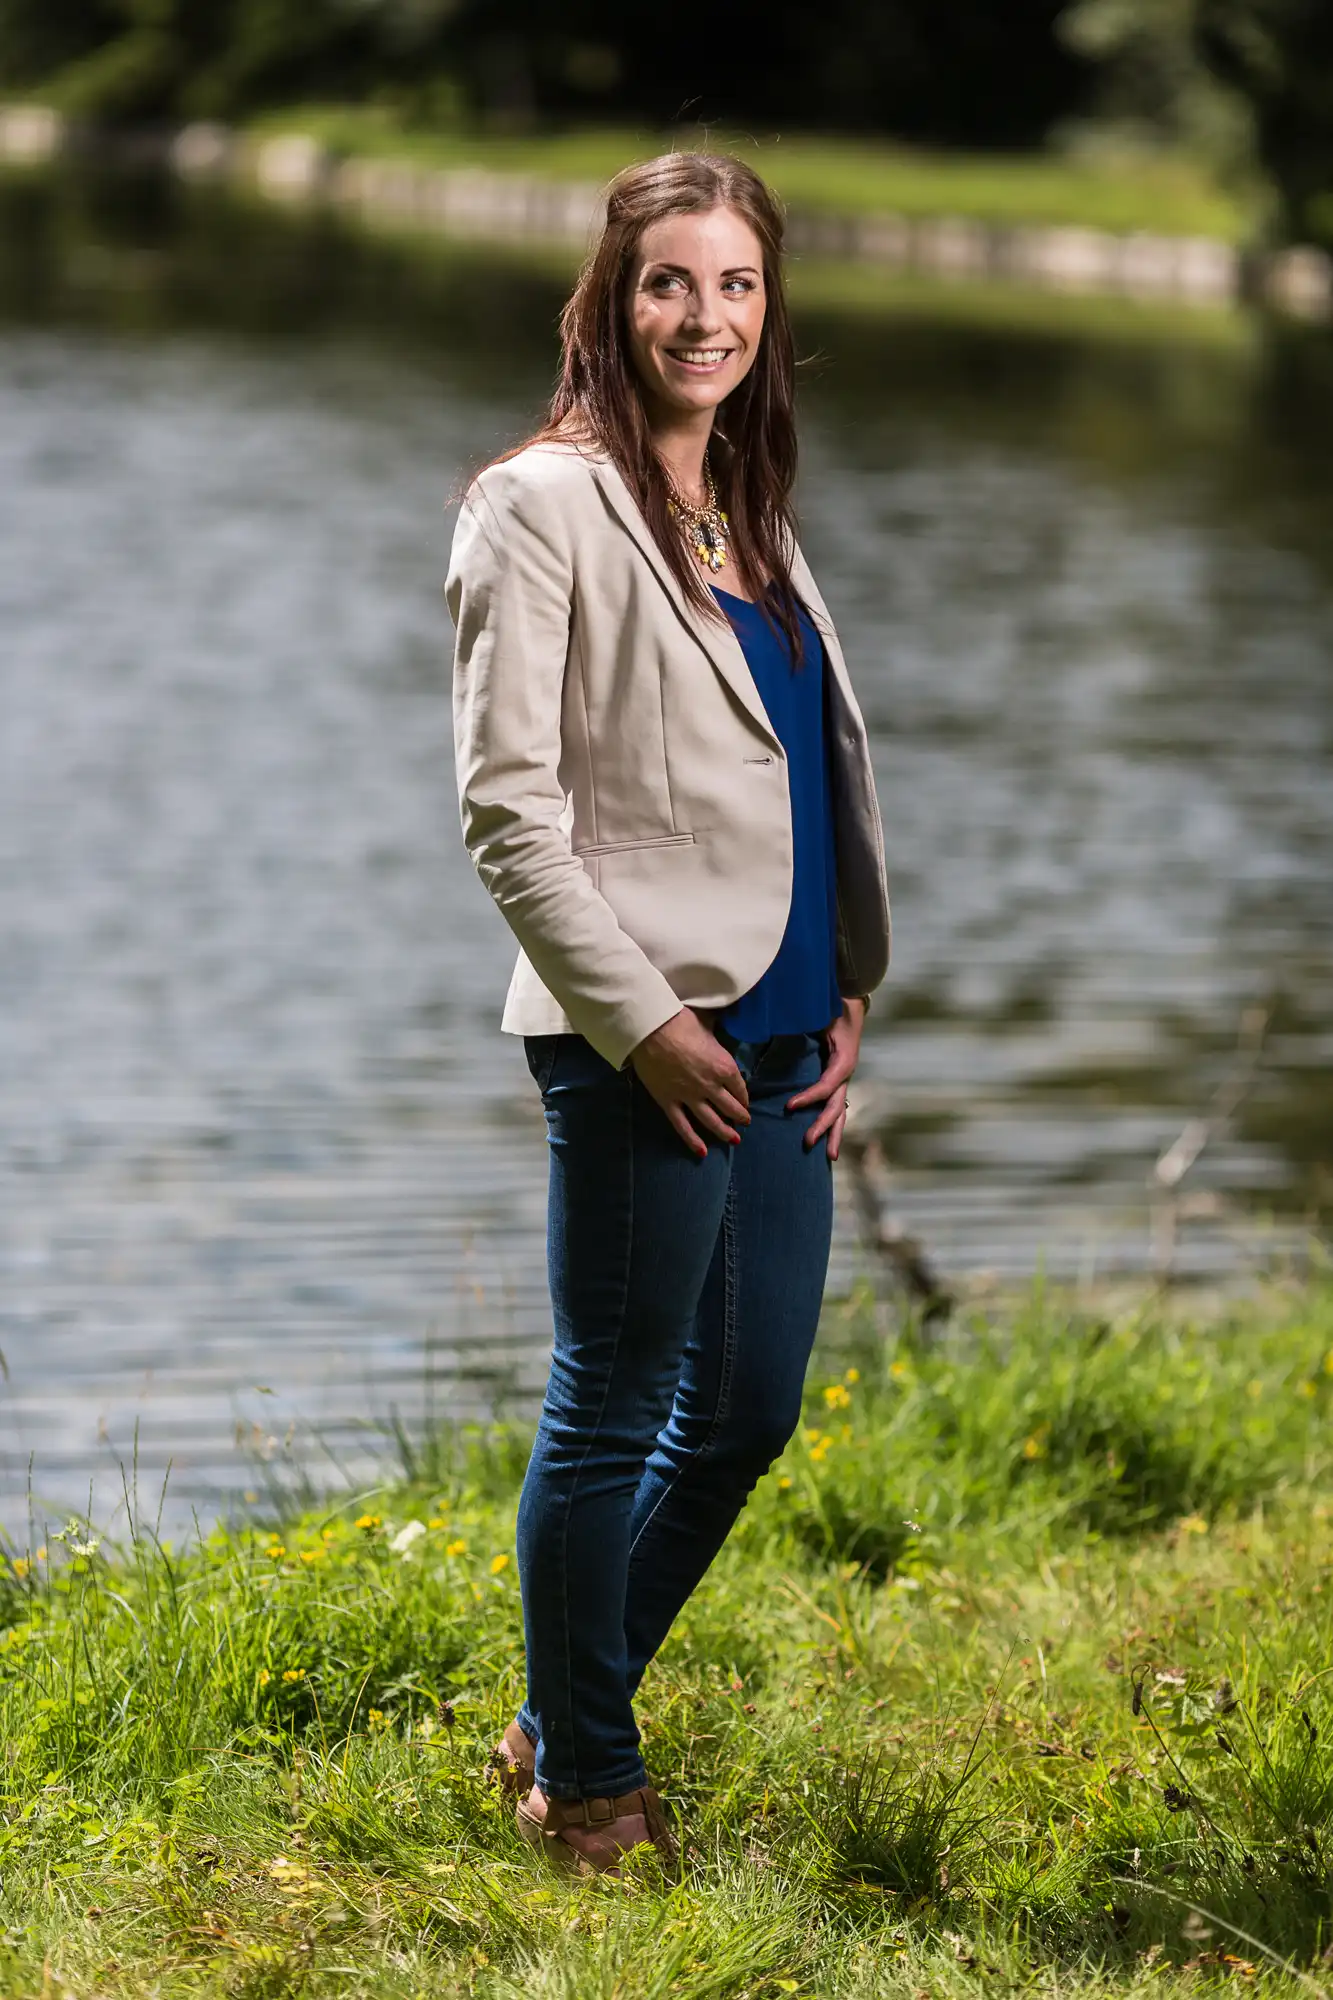 A woman in a blazer and jeans smiling by a lakeside.